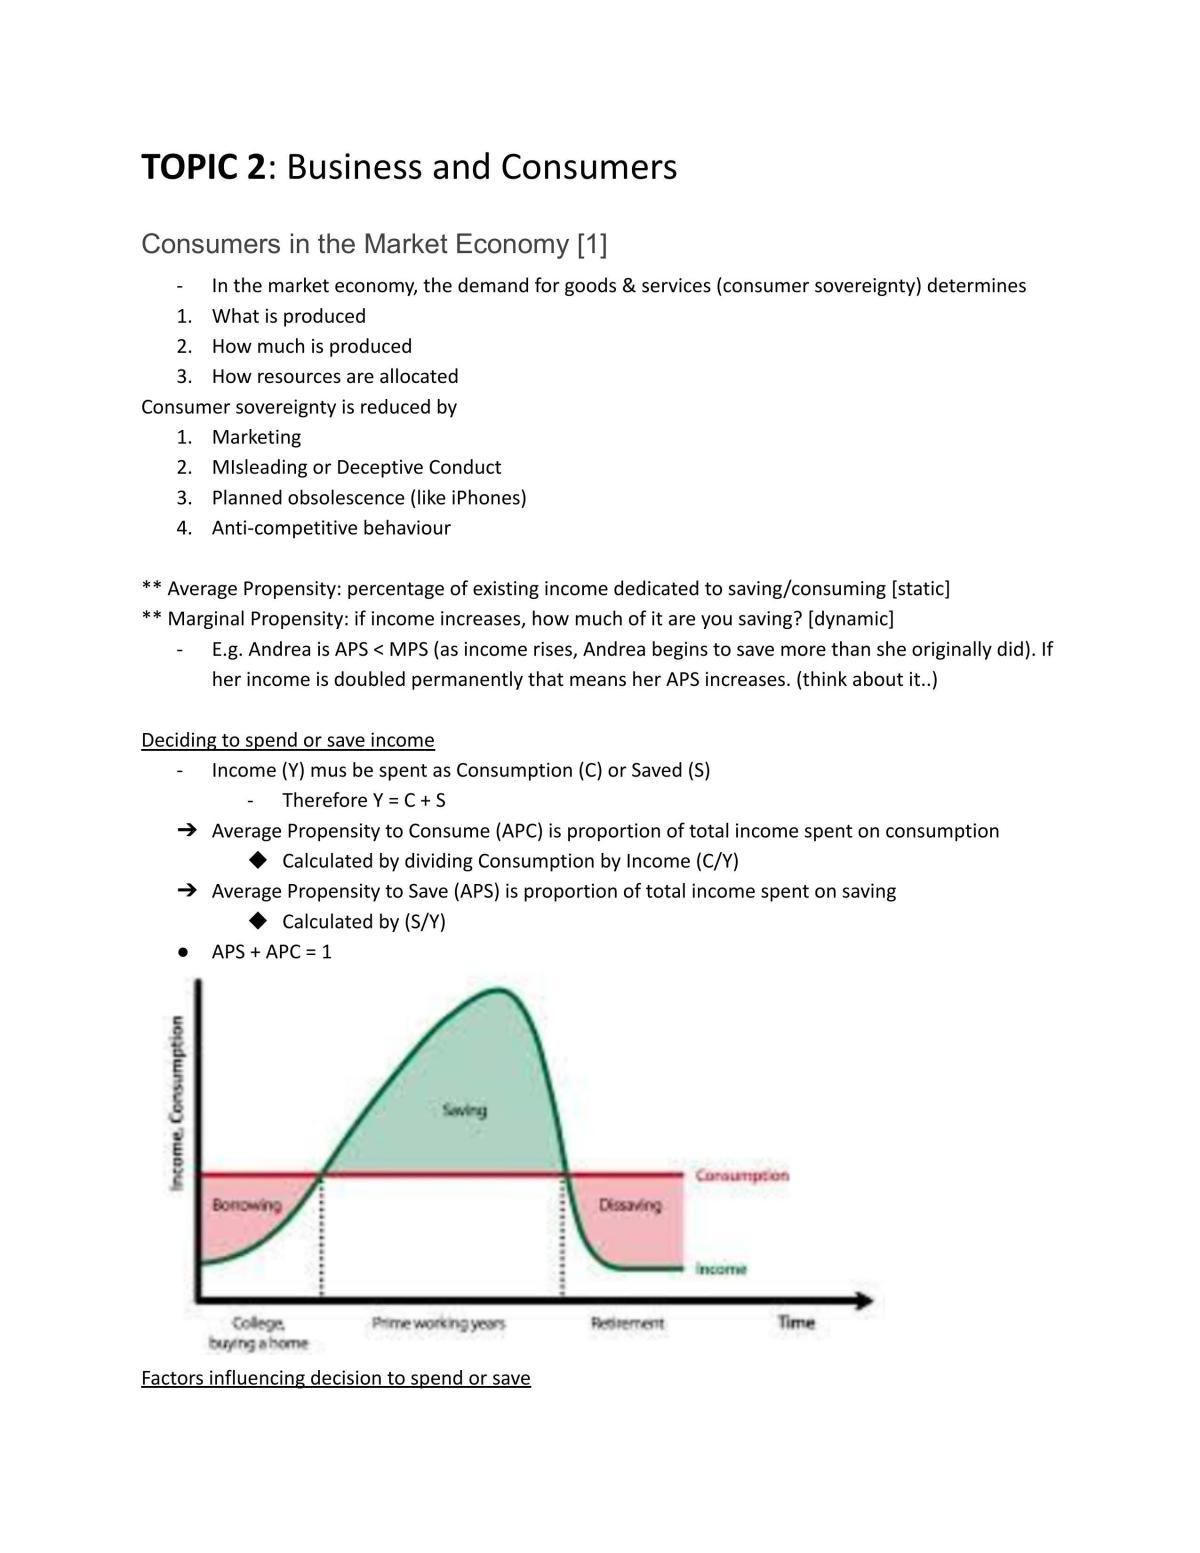 [Preliminary Topic 2 FULL Notes] Business and Consumers  - Page 1